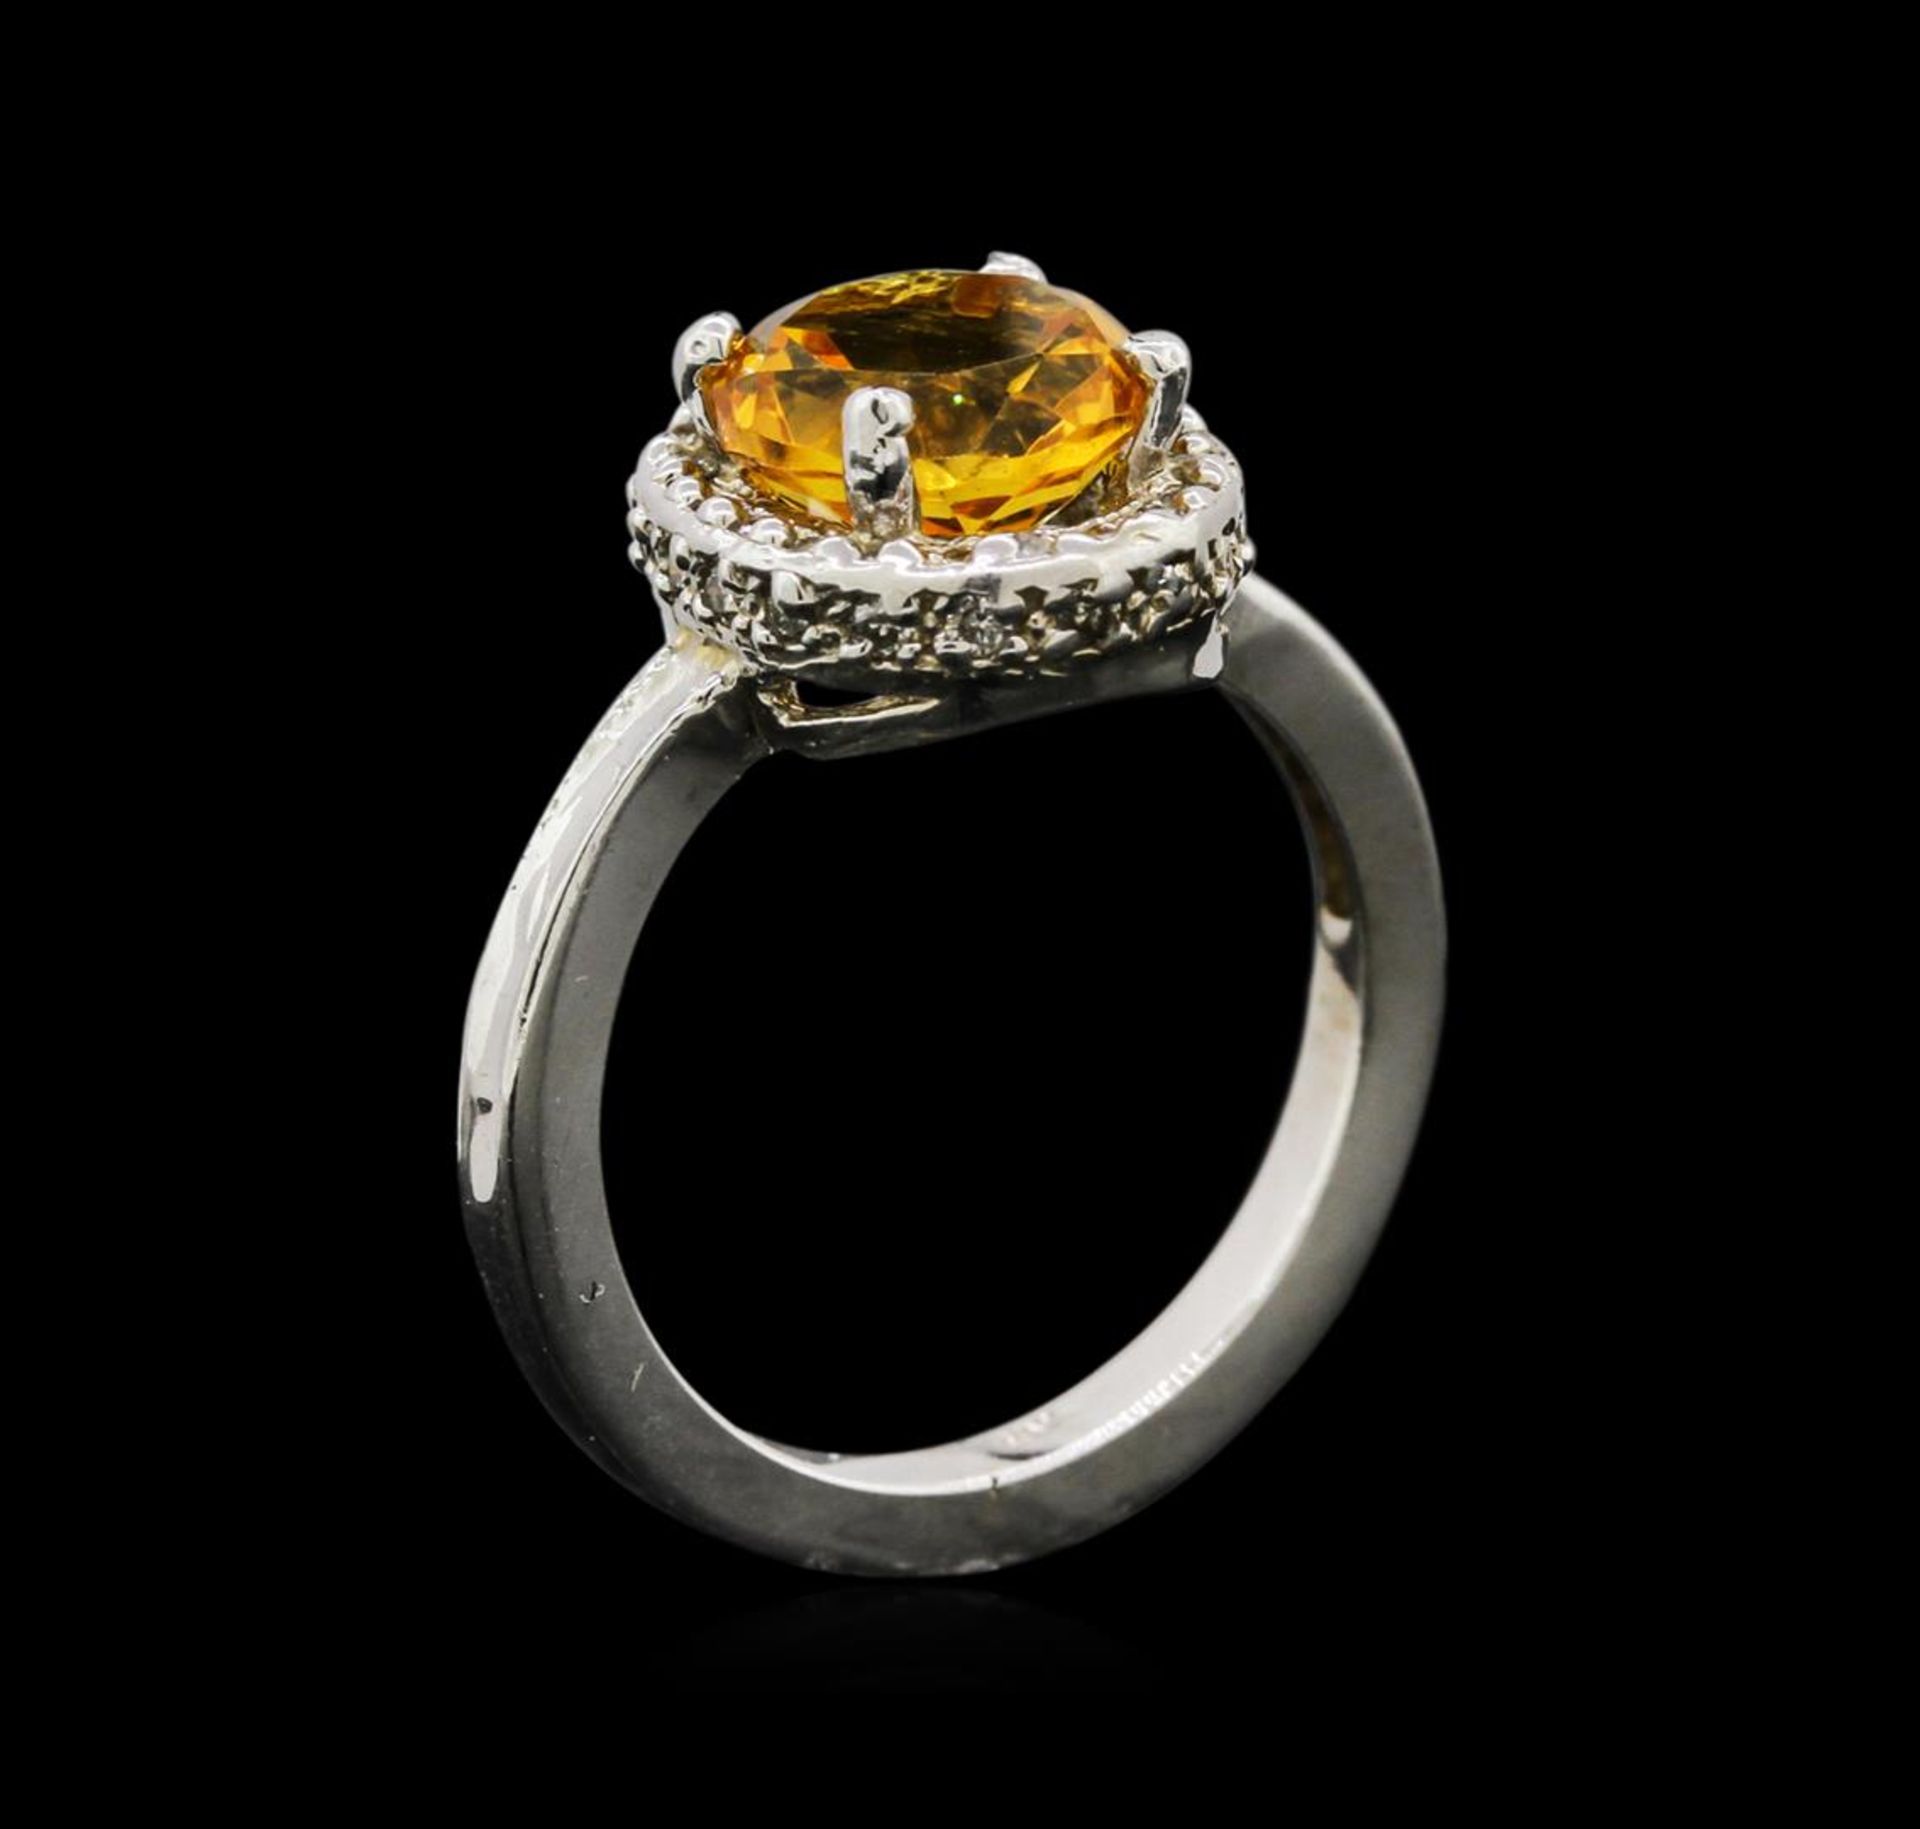 14KT White Gold 2.35 ctw Citrine and Diamond Ring - Image 3 of 3